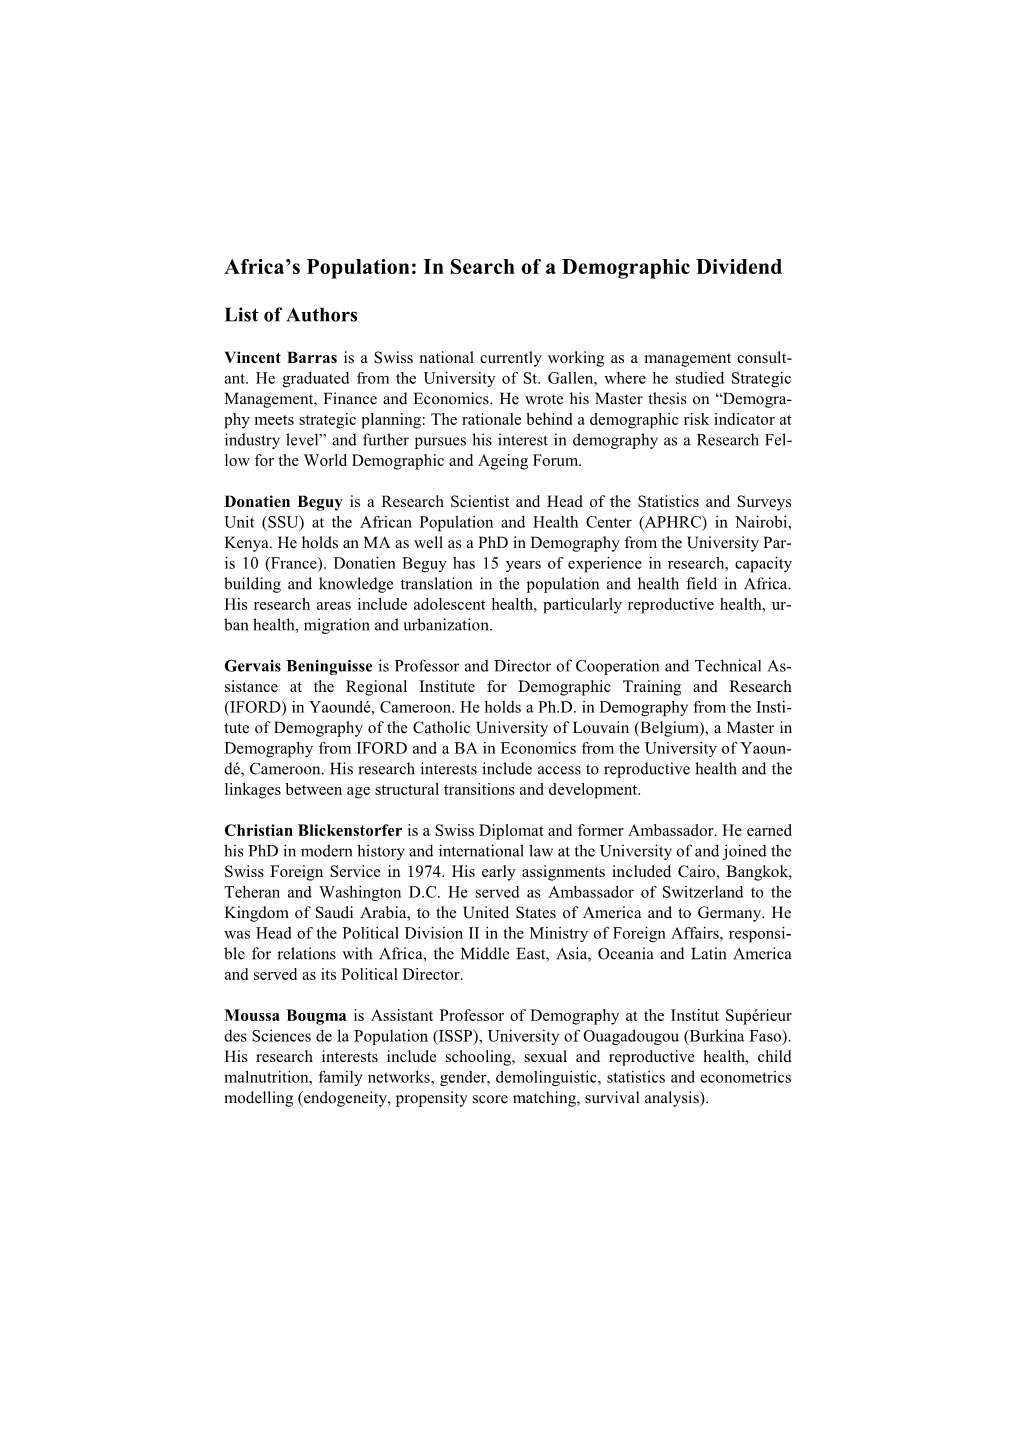 Africa's Population: in Search of a Demographic Dividend